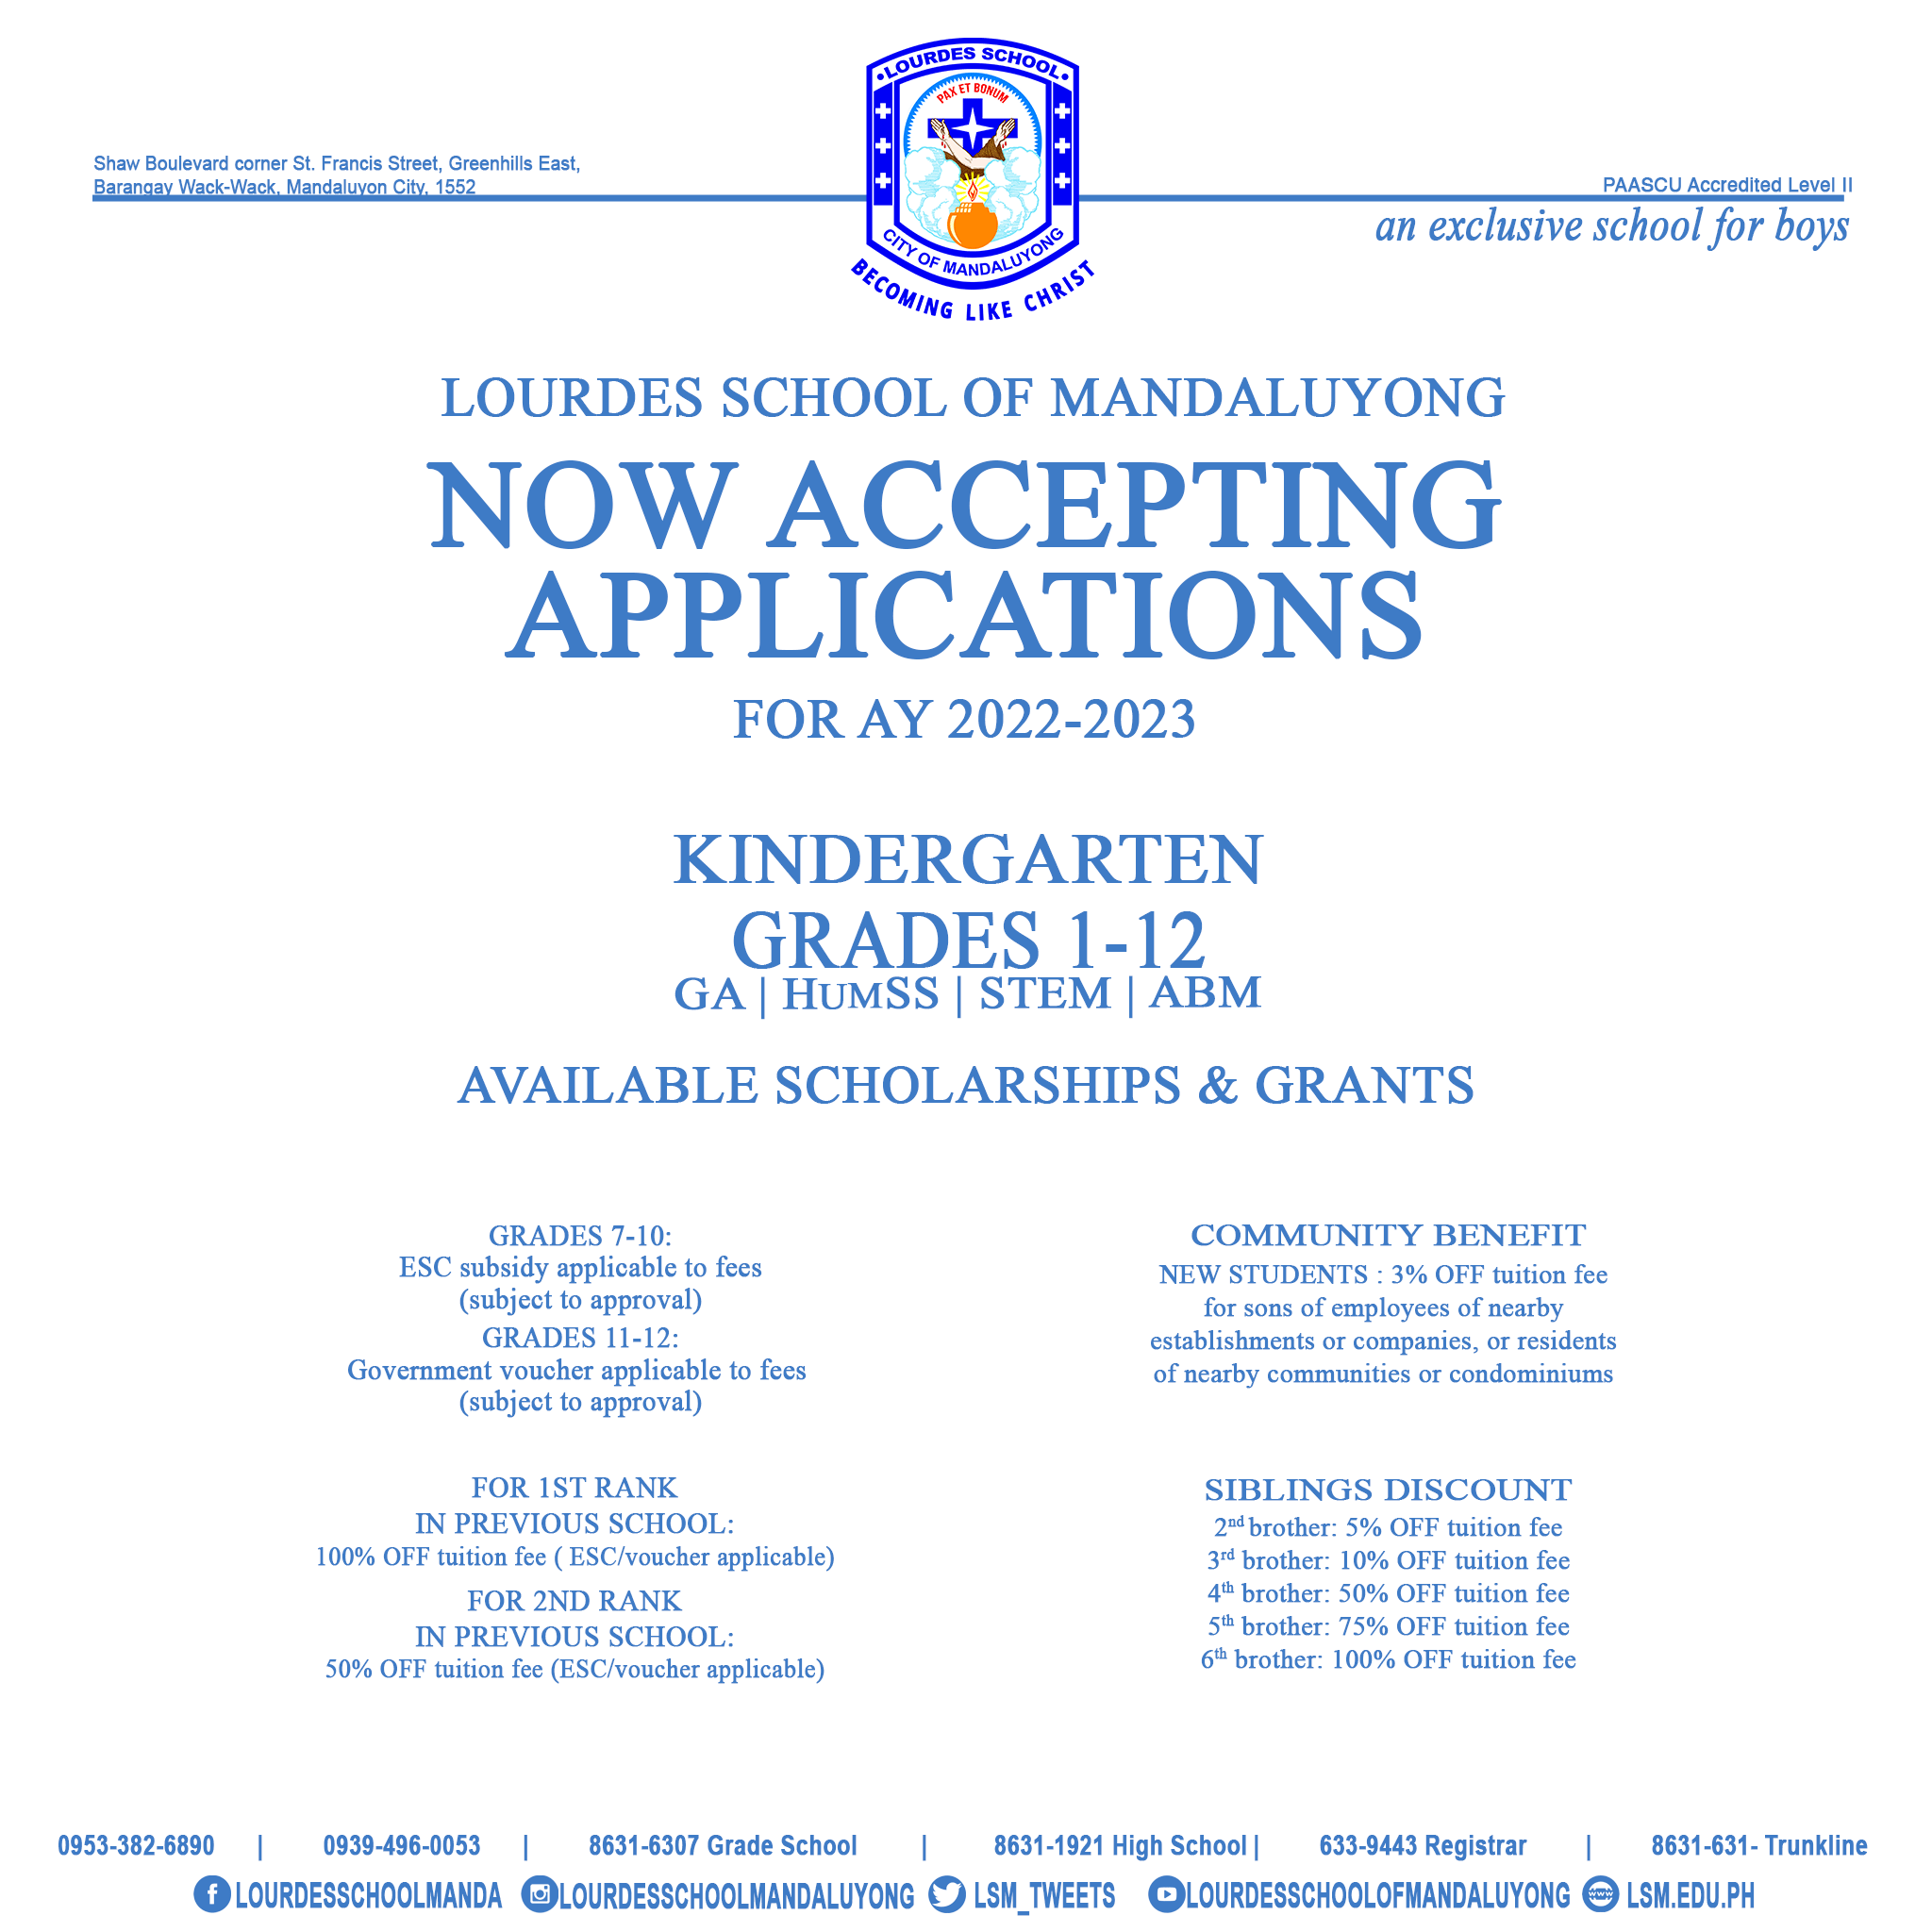 Lourdes School of Mandaluyong - New Accepting Applicants for AY 2022 - 2023